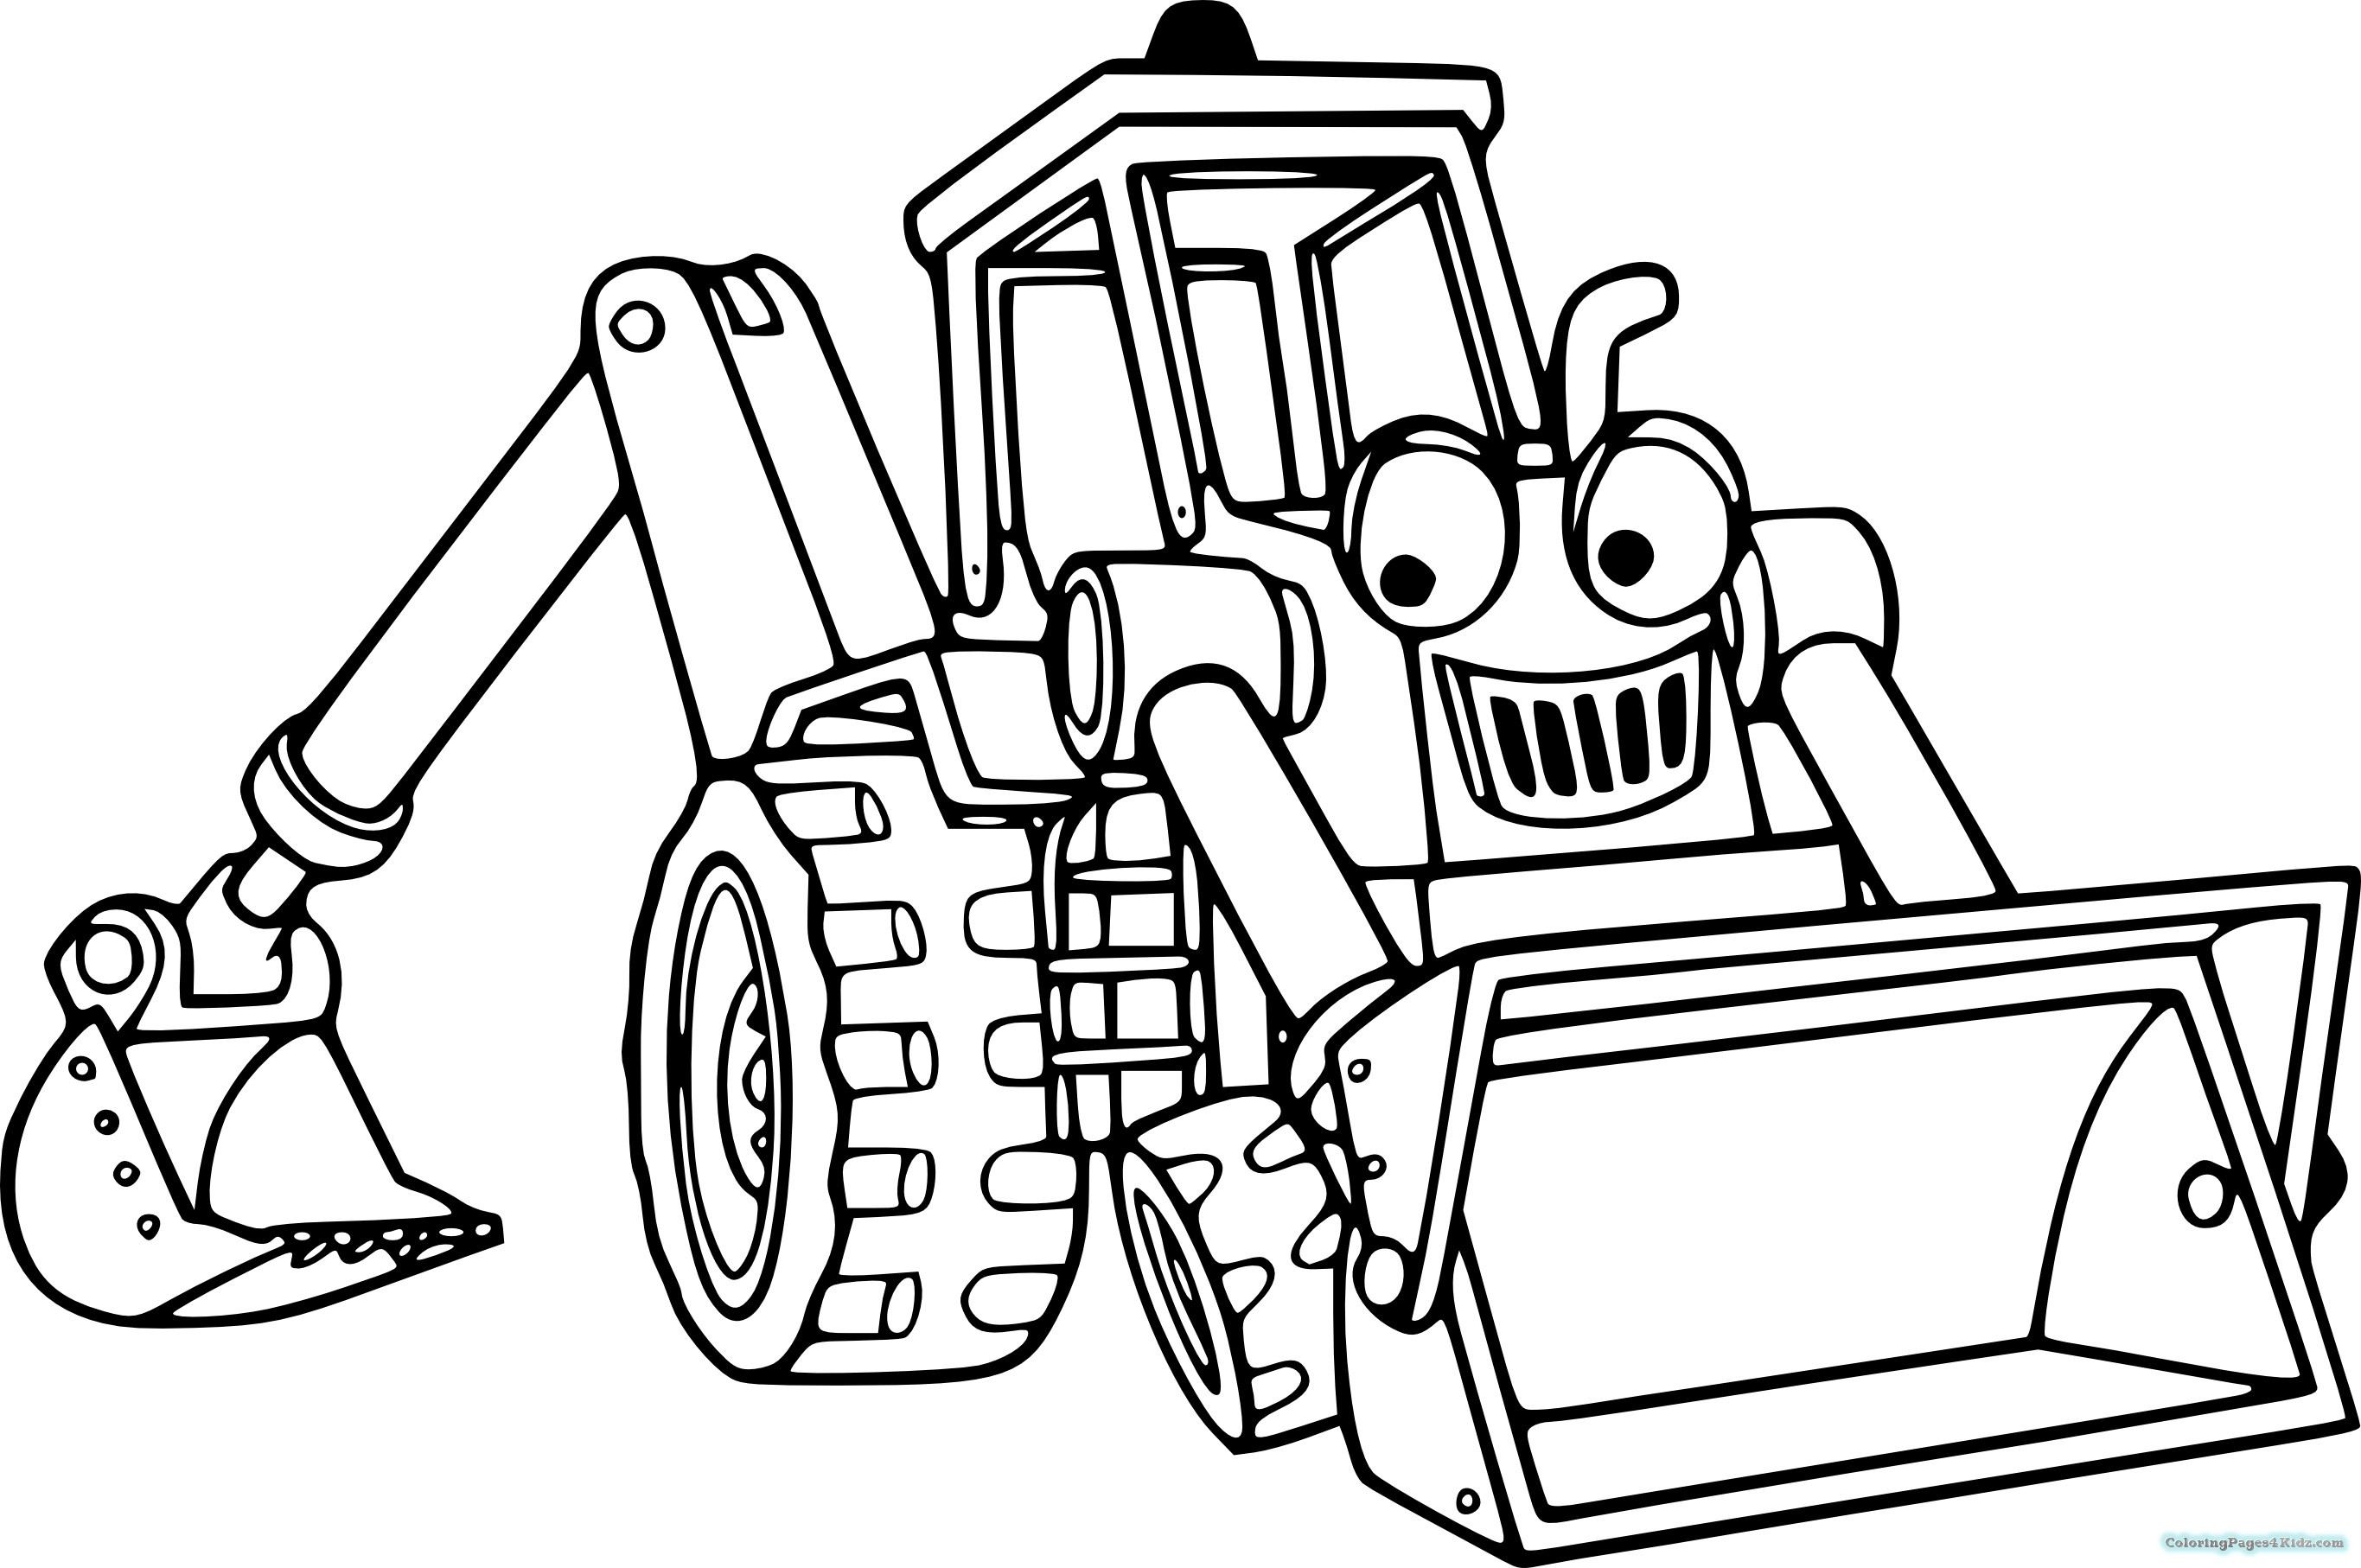 Tractor Coloring Pages
 Johnny Tractor Free Coloring Pages